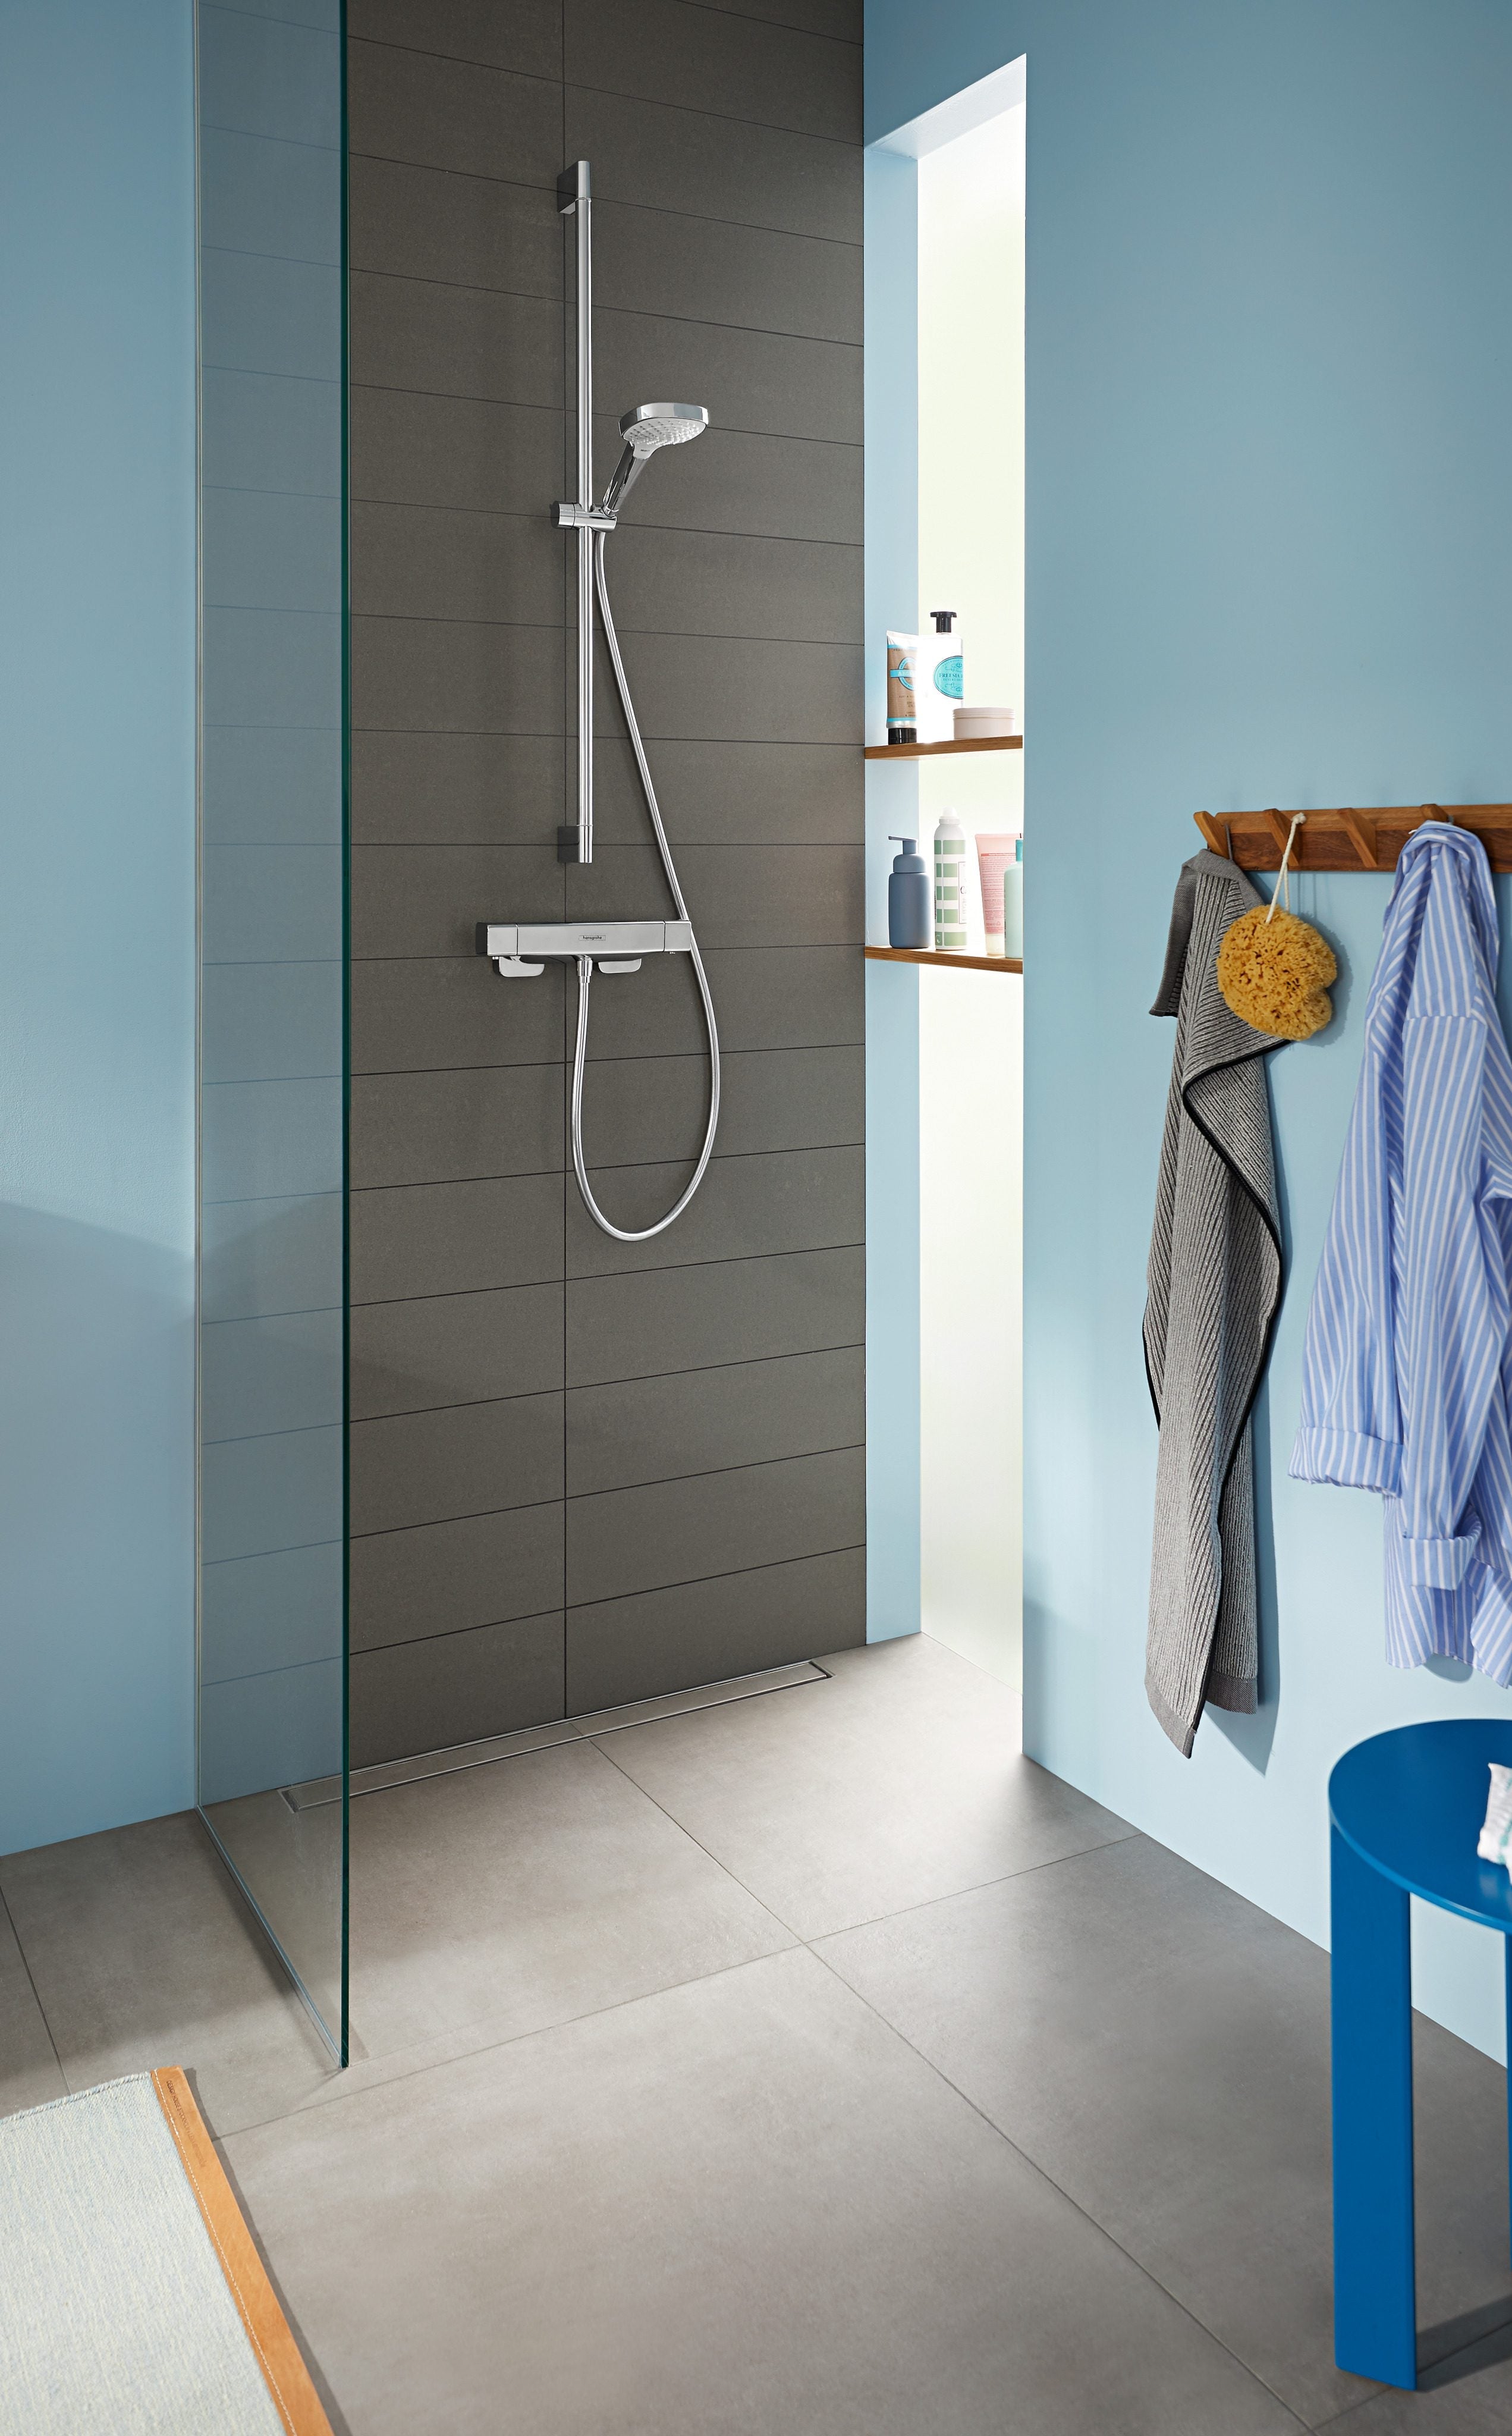 Croma Select E Vario Shower Set - Premium Showers from Hansgrohe - Just GHS1255! Shop now at Kimo in Ghana